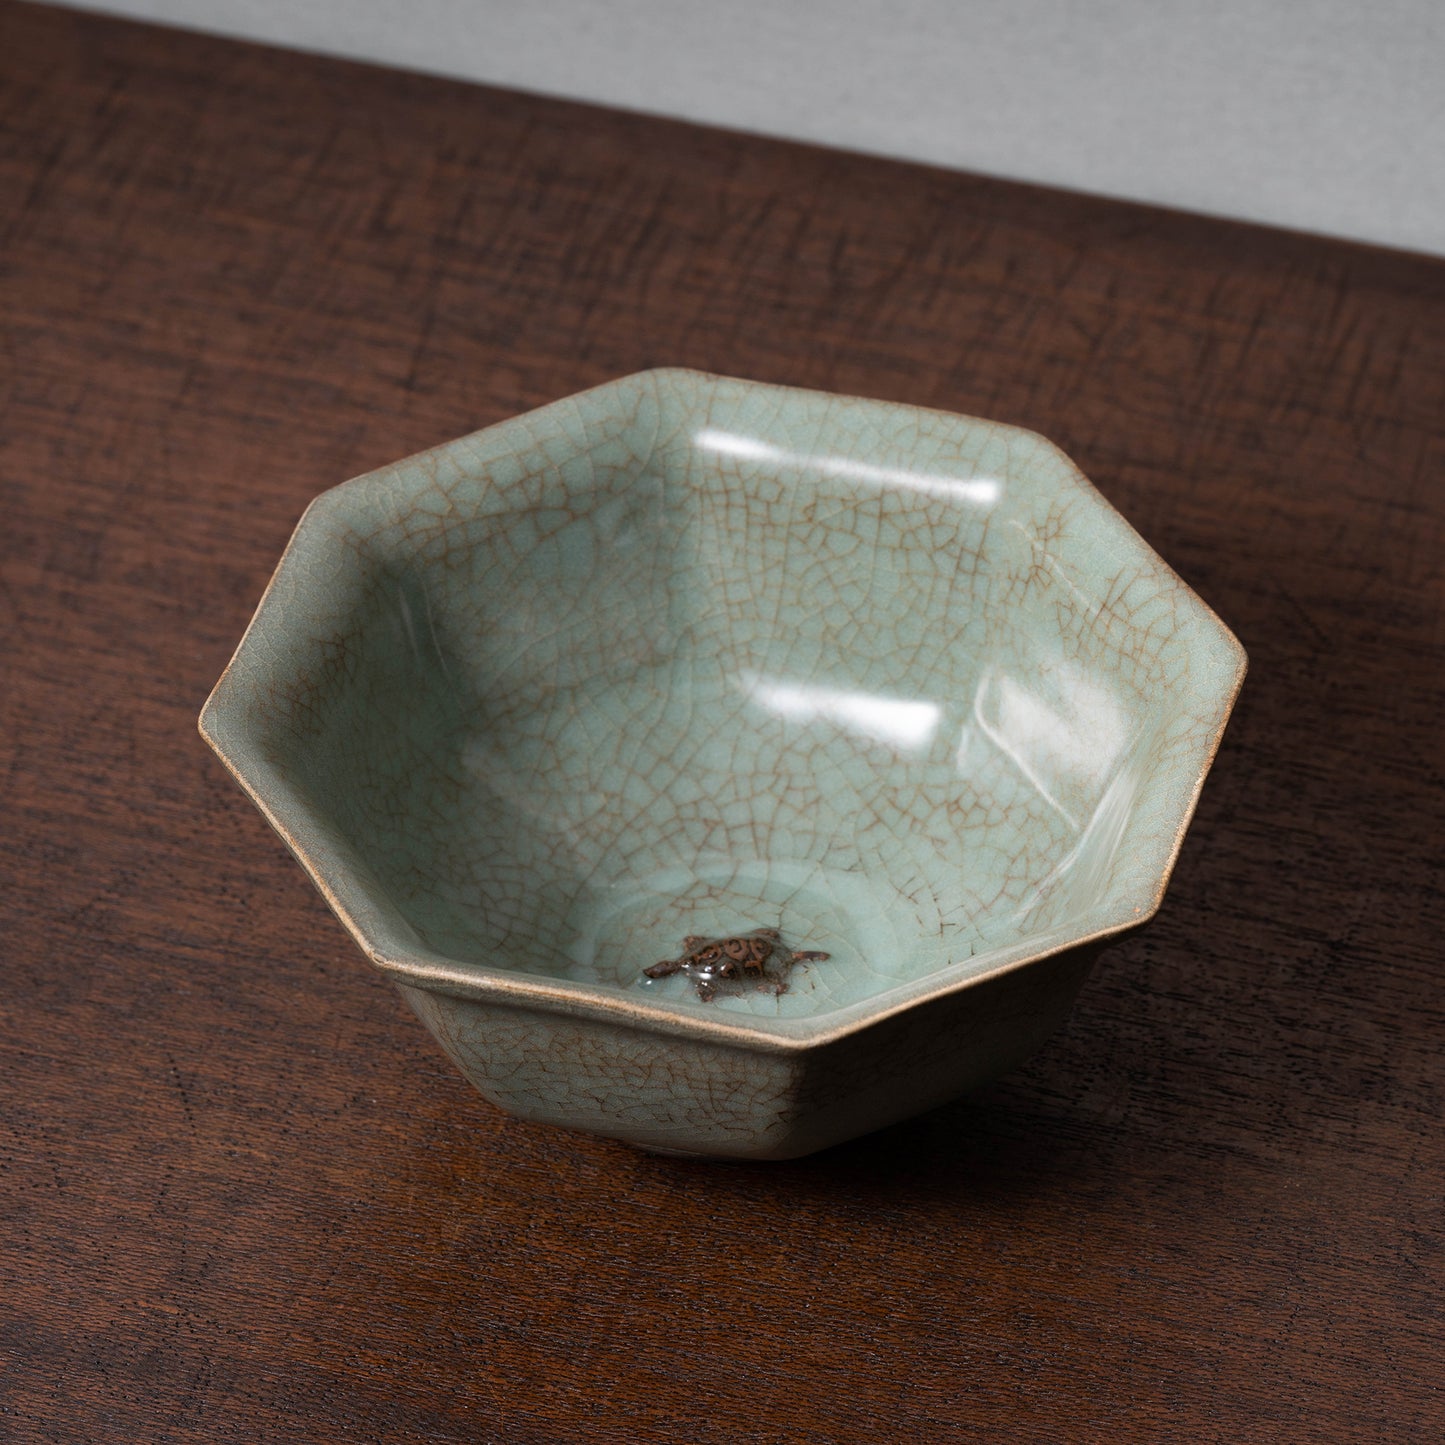 Yuan Dynasty Guan ware Celadon Teabowl with Pasted Tortoise Design